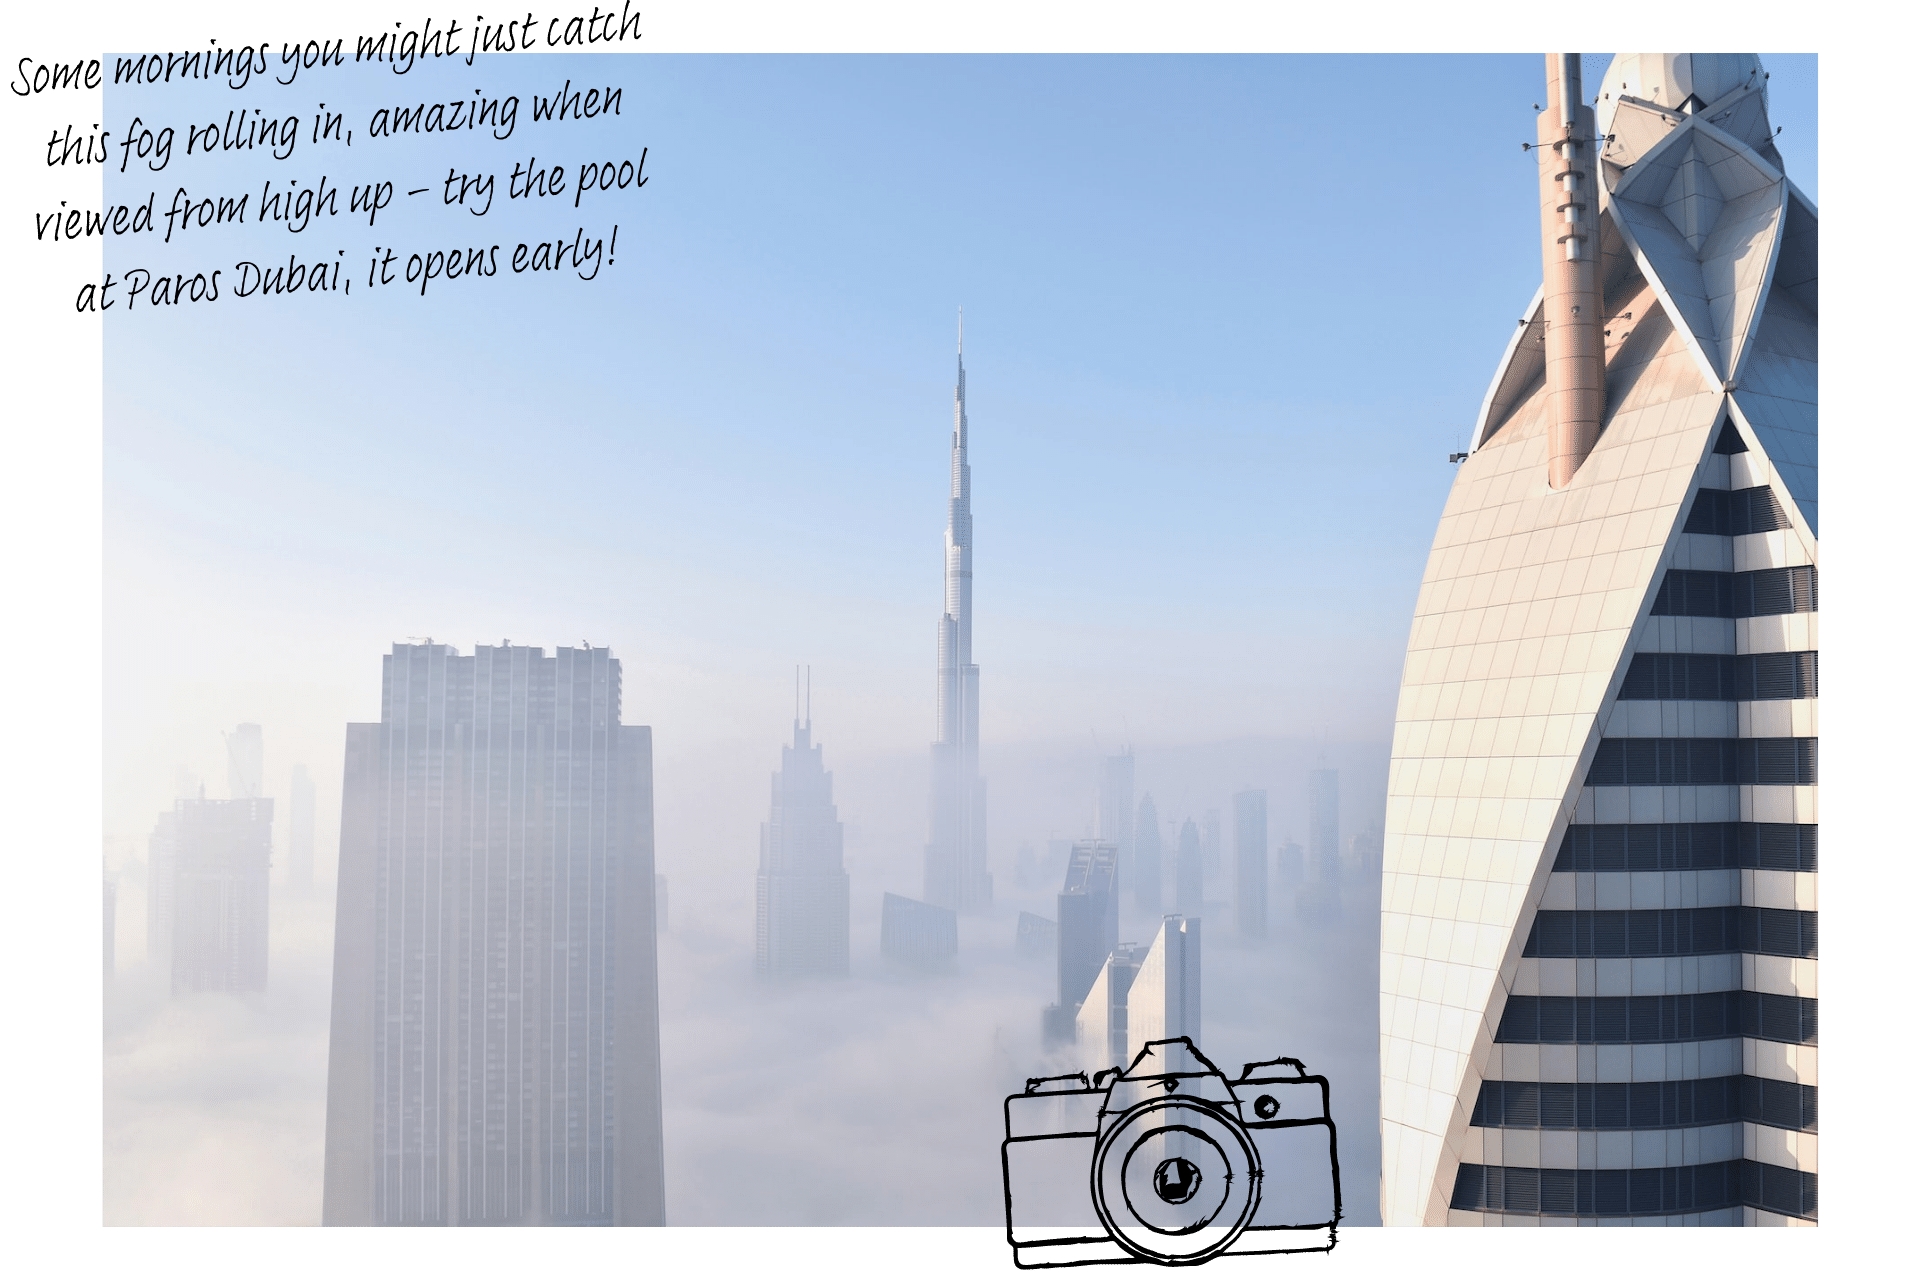 Fog rolls in, high up in the skies above Dubai, skyscrapers looming in close.